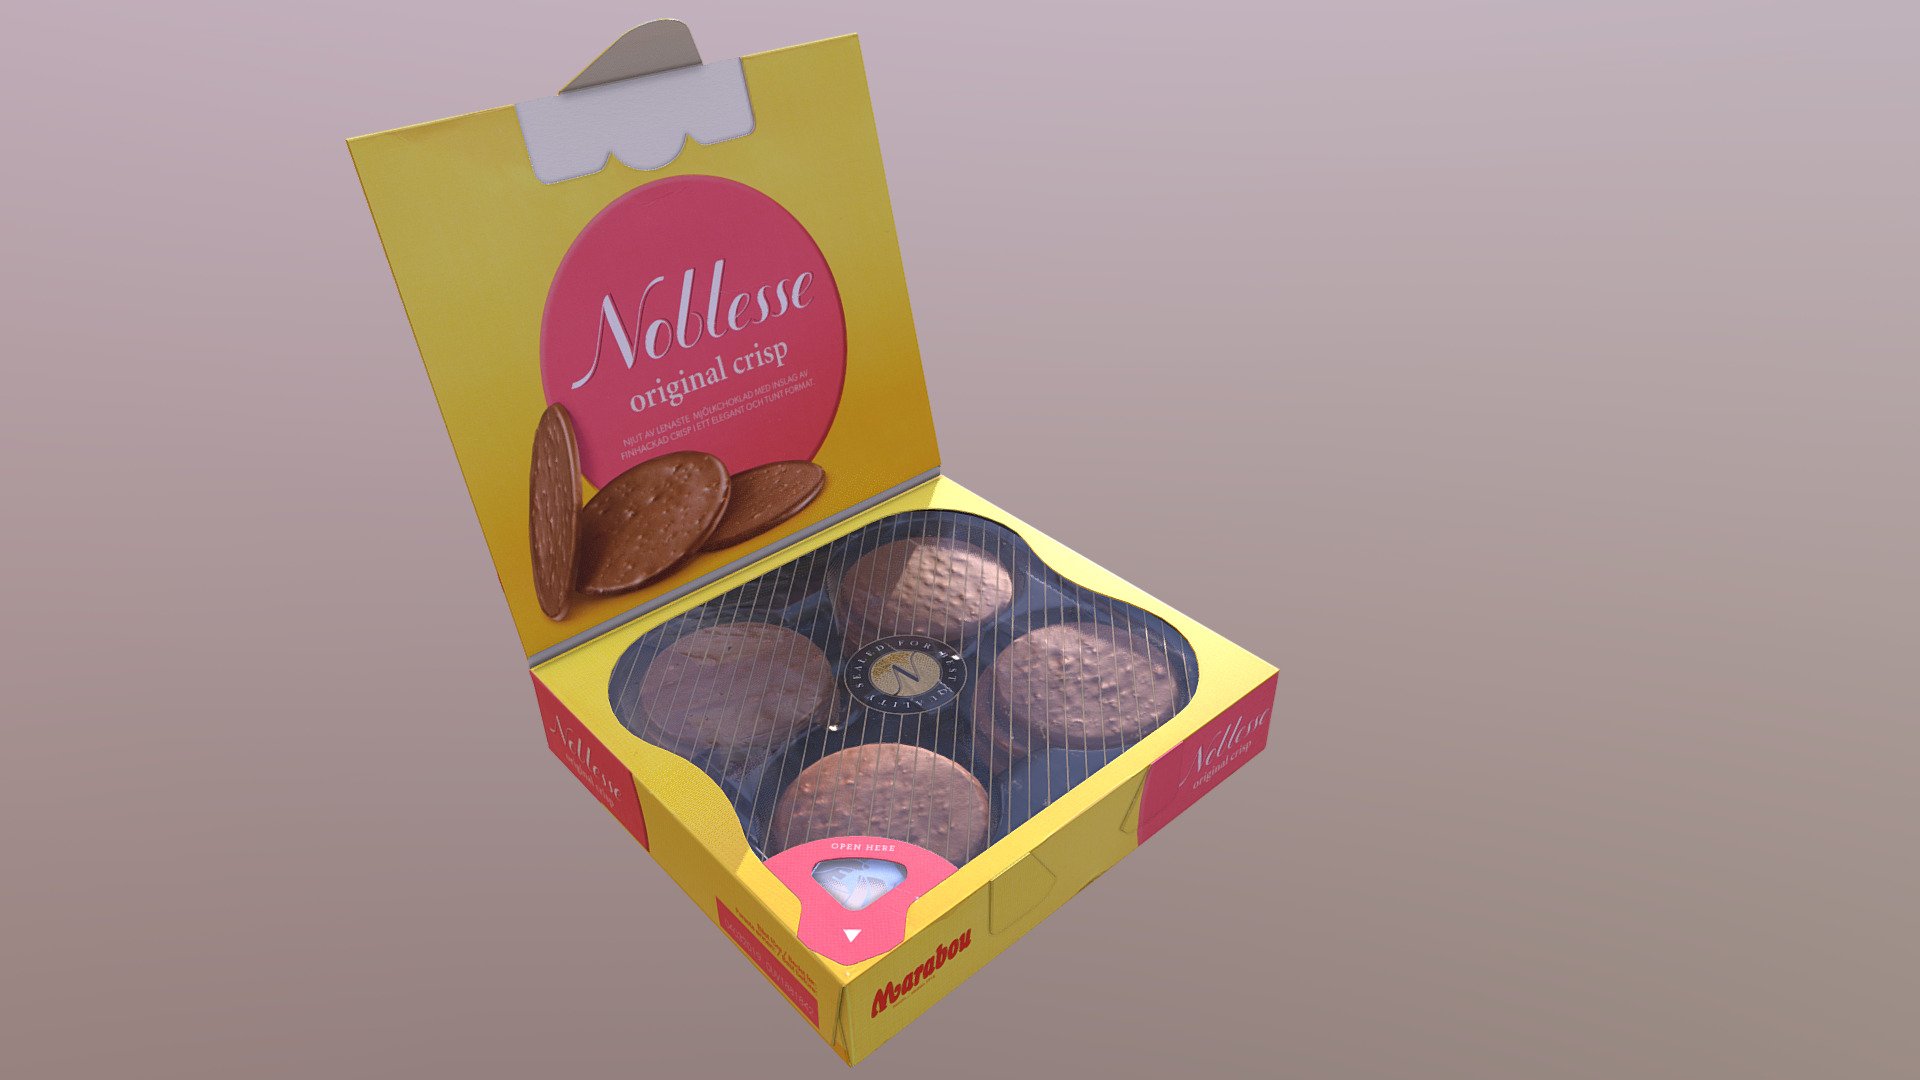 Noblesse Chocolate
A small box of milk chocolate thins.

For commission work, please contact: info@arvify.com - Noblesse Chocolate - 3D model by Arvify 3d model